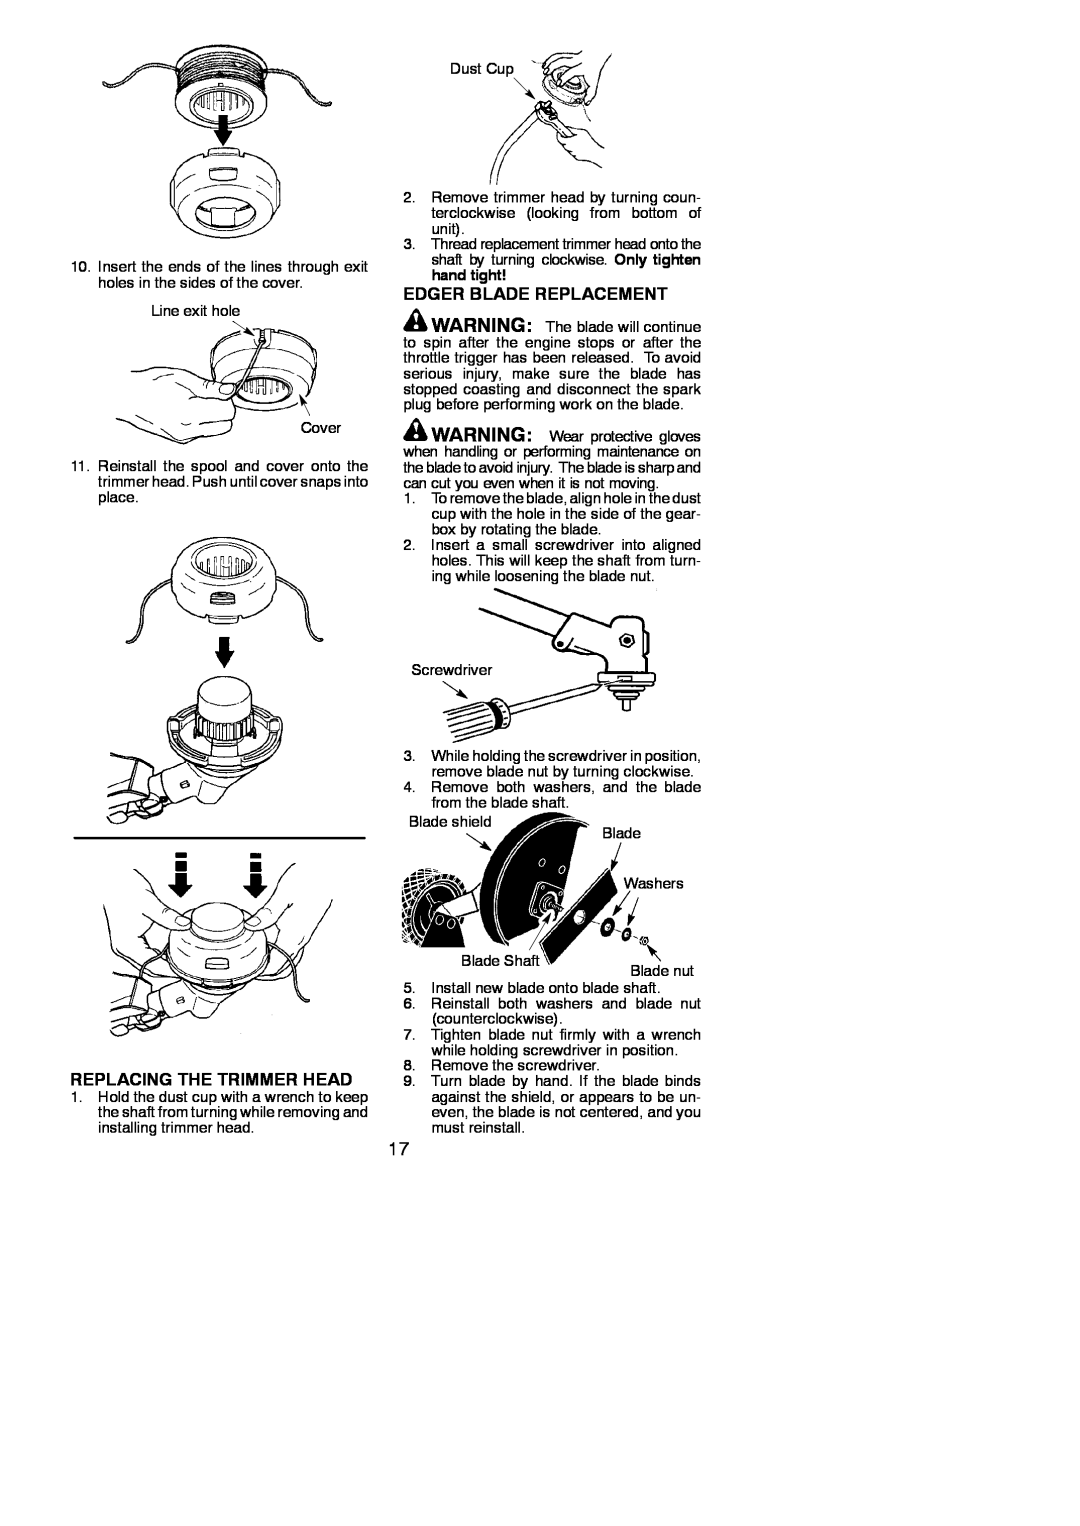 Poulan 115275026, 952711963 instruction manual Edger Blade Replacement, Replacing The Trimmer Head 